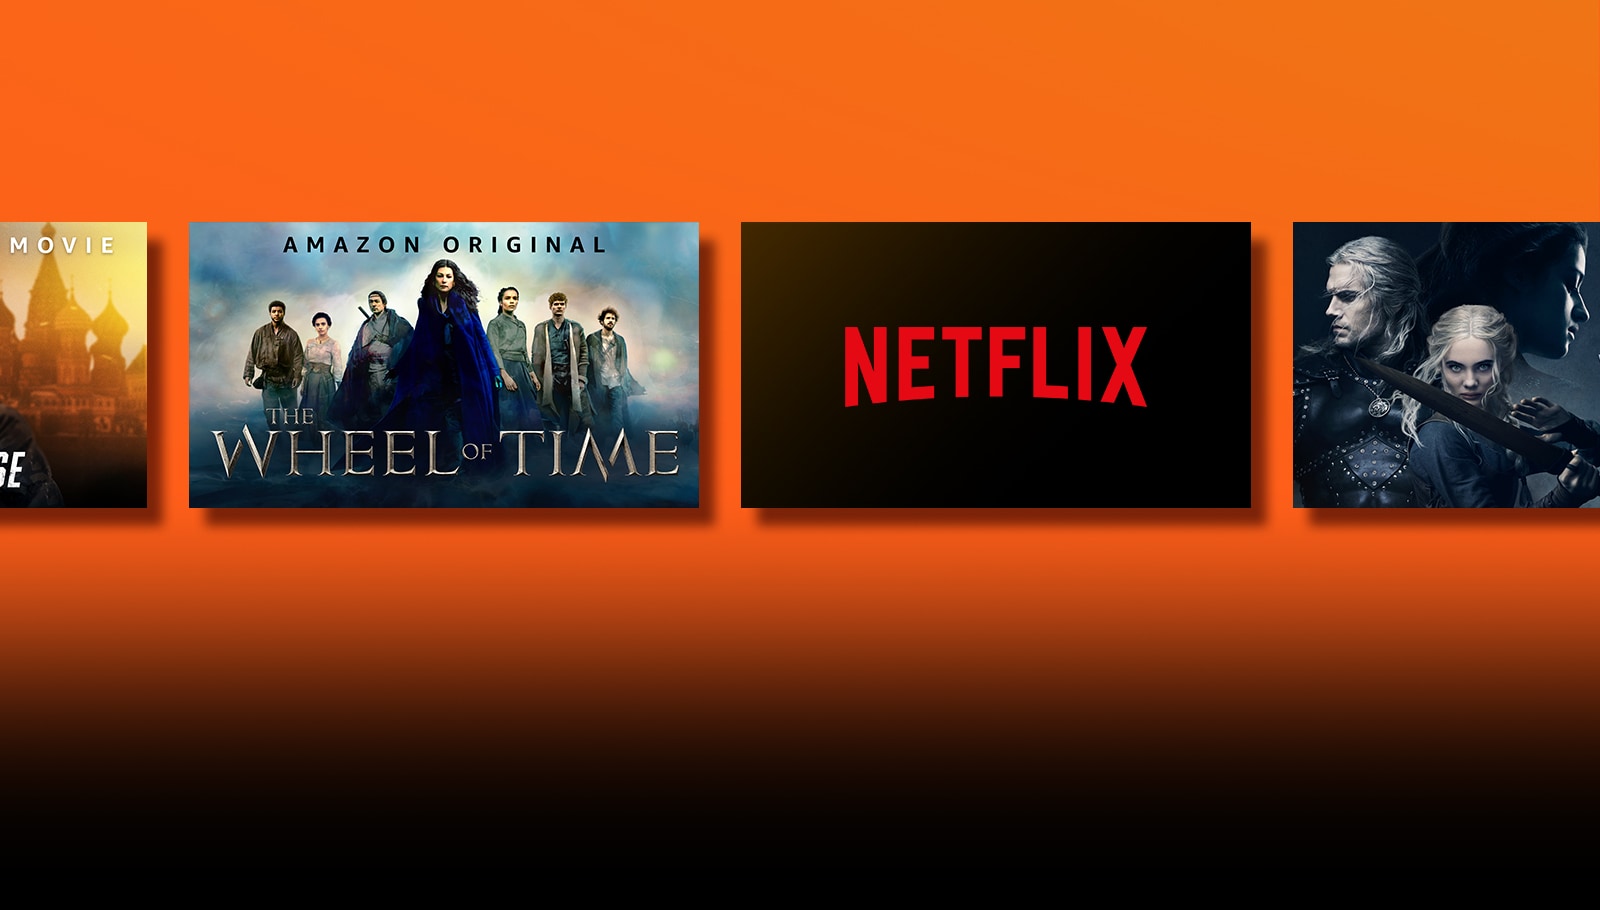 There are logos of streaming service platforms and matching footages right next to each logo. Netflix logo and money heist and the Witcher. Prime Video logo and Without Remorse and The Wheel of Time. Livenow logo and mamamoo teaser image and OneUs teaser image. 